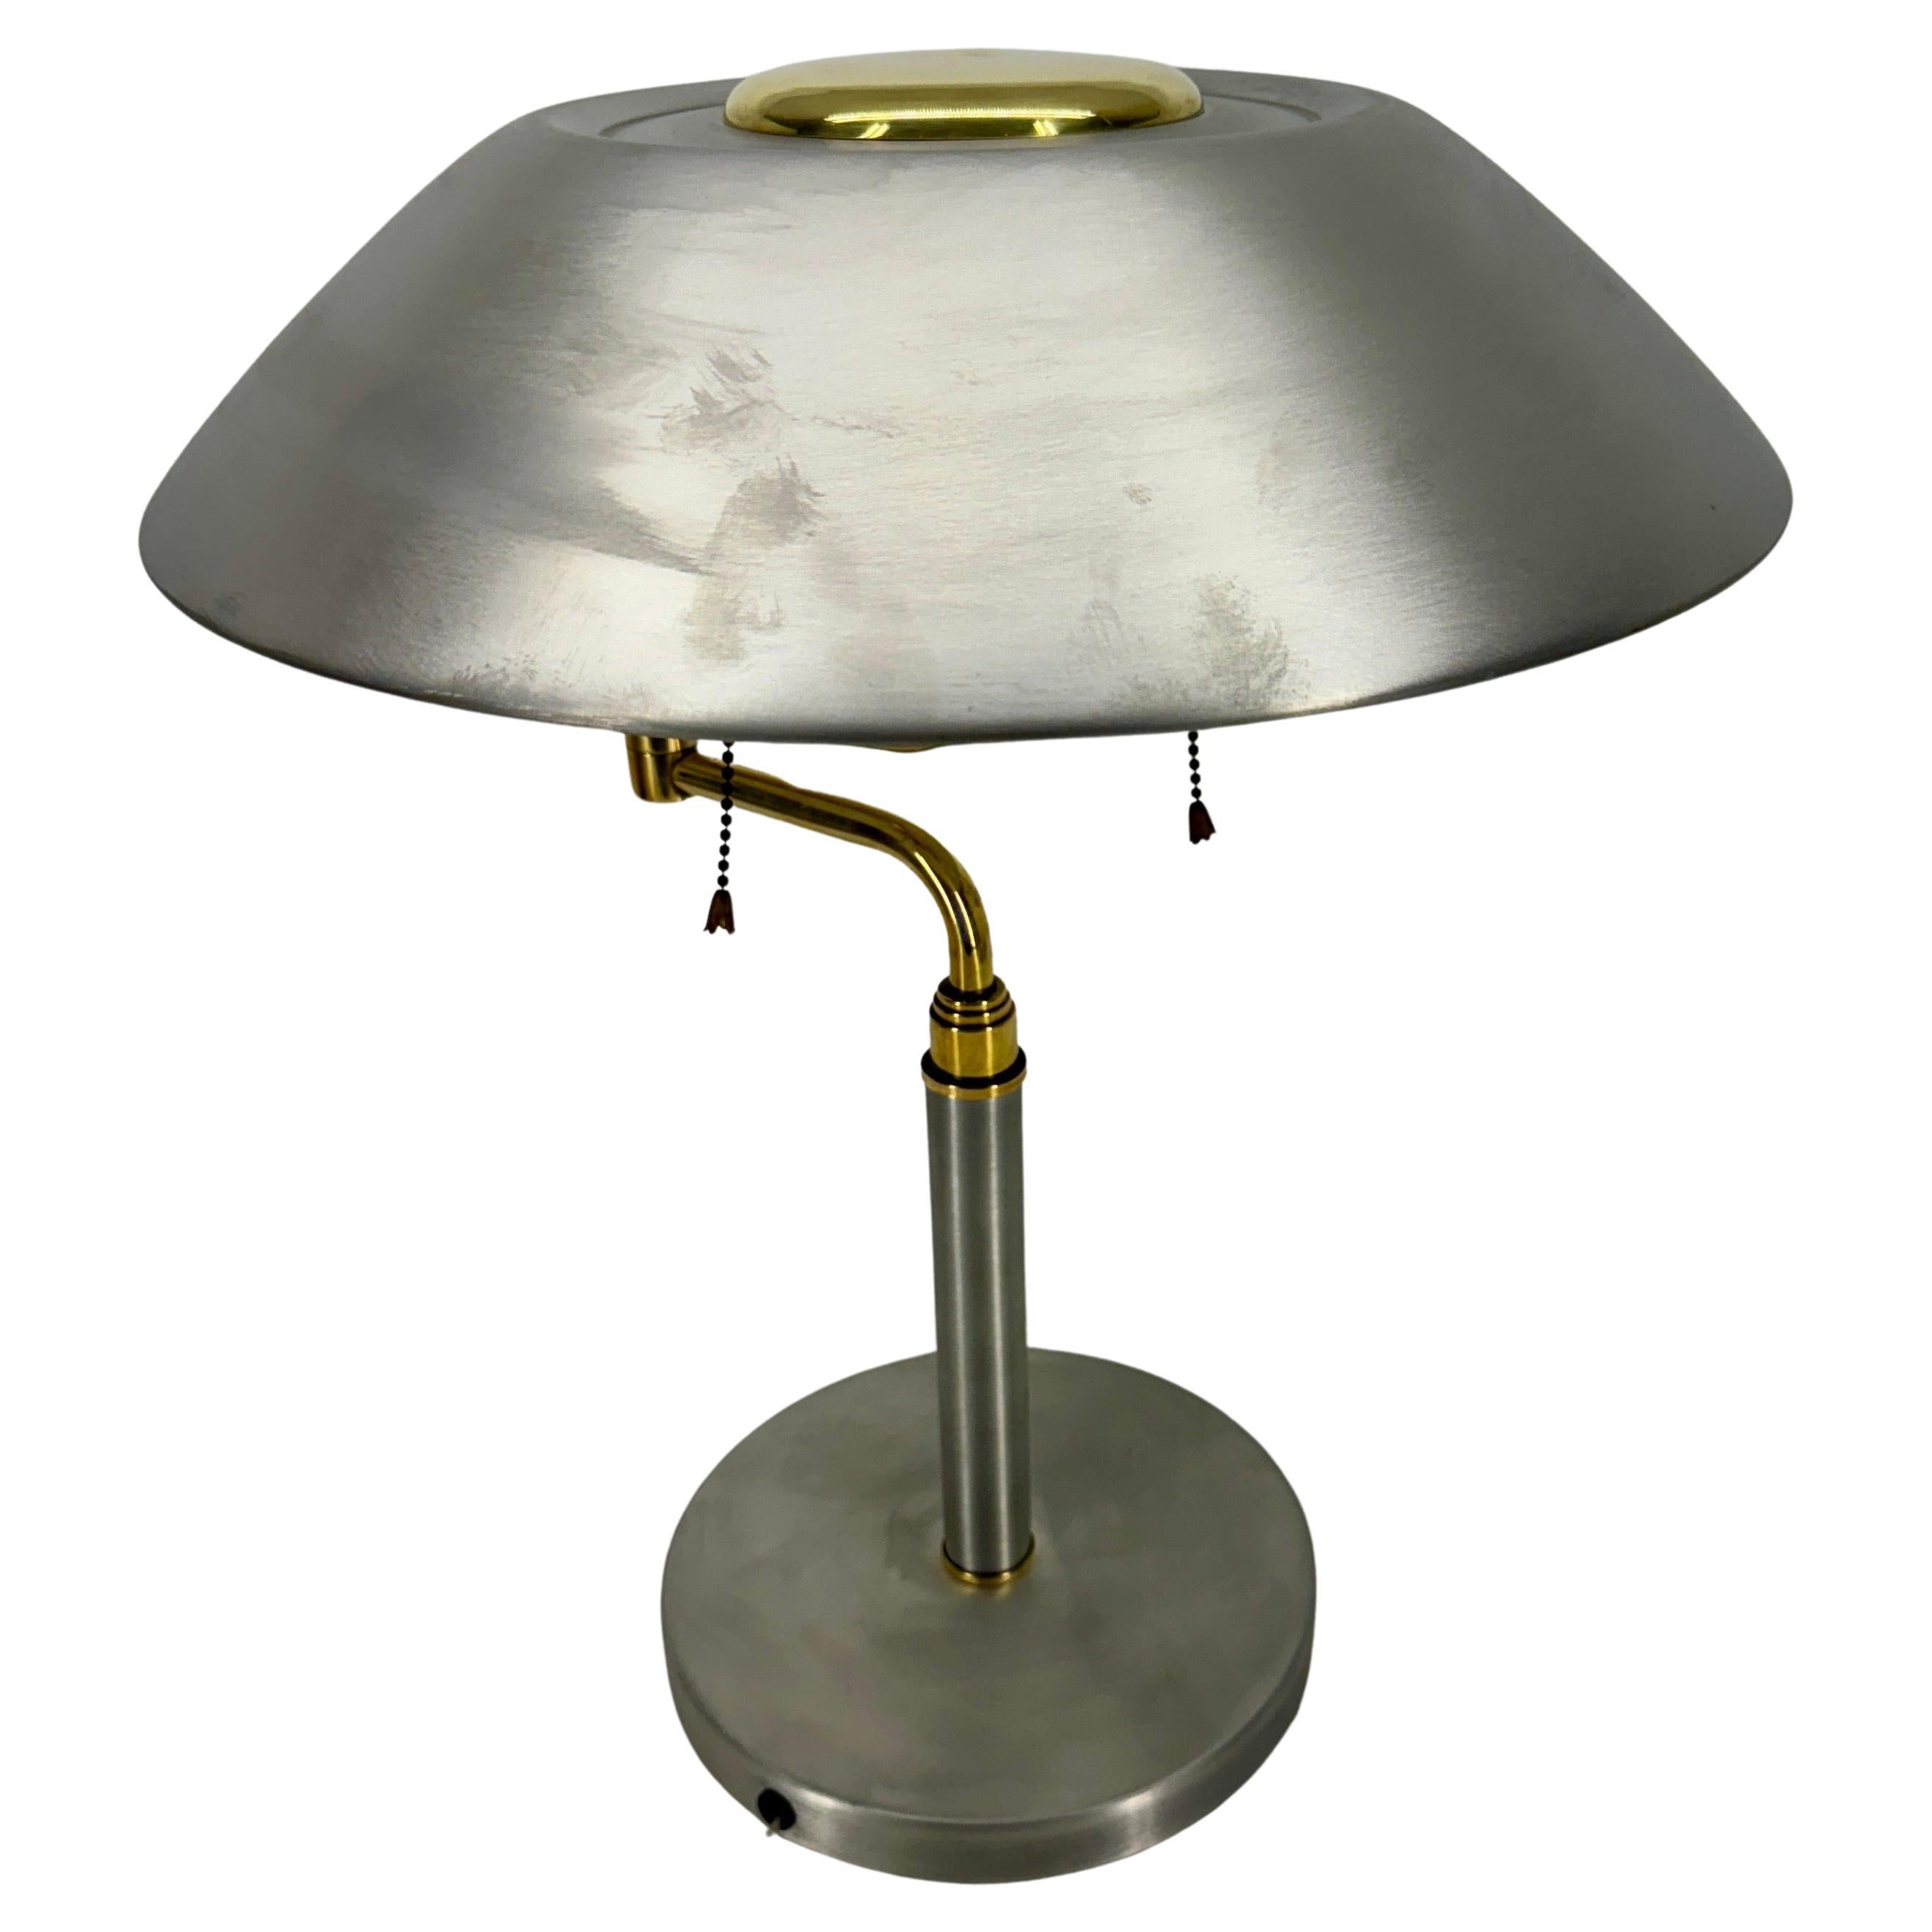 American Vintage Mid-Century Modern Desk Lamp in Aluminum and Brass  In Good Condition For Sale In Haddonfield, NJ